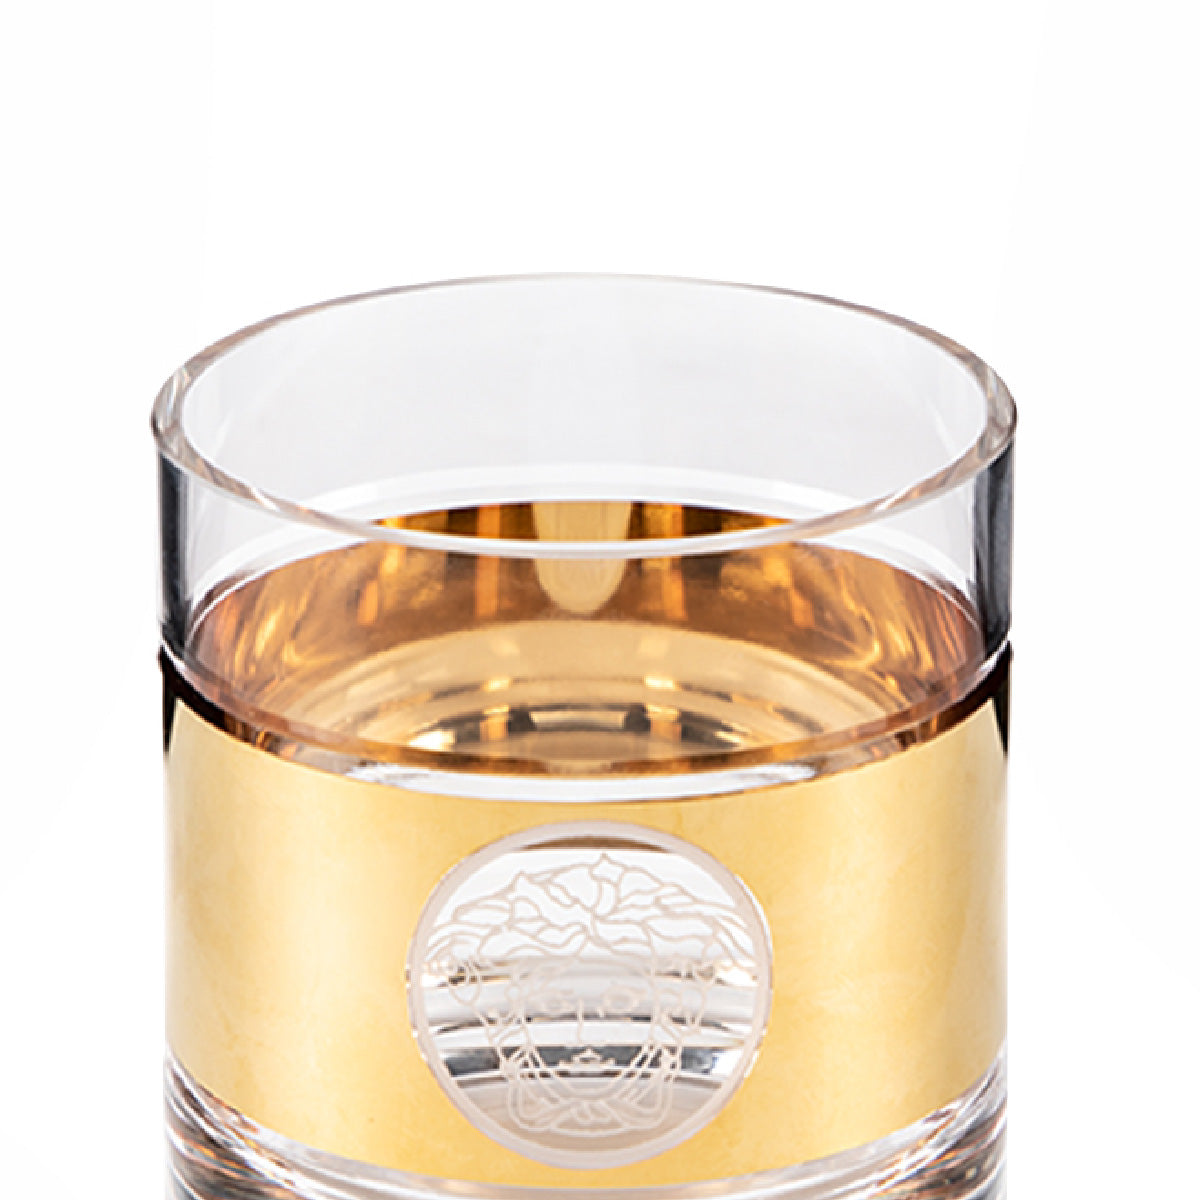 Versace Whisky Old Fashioned Glass